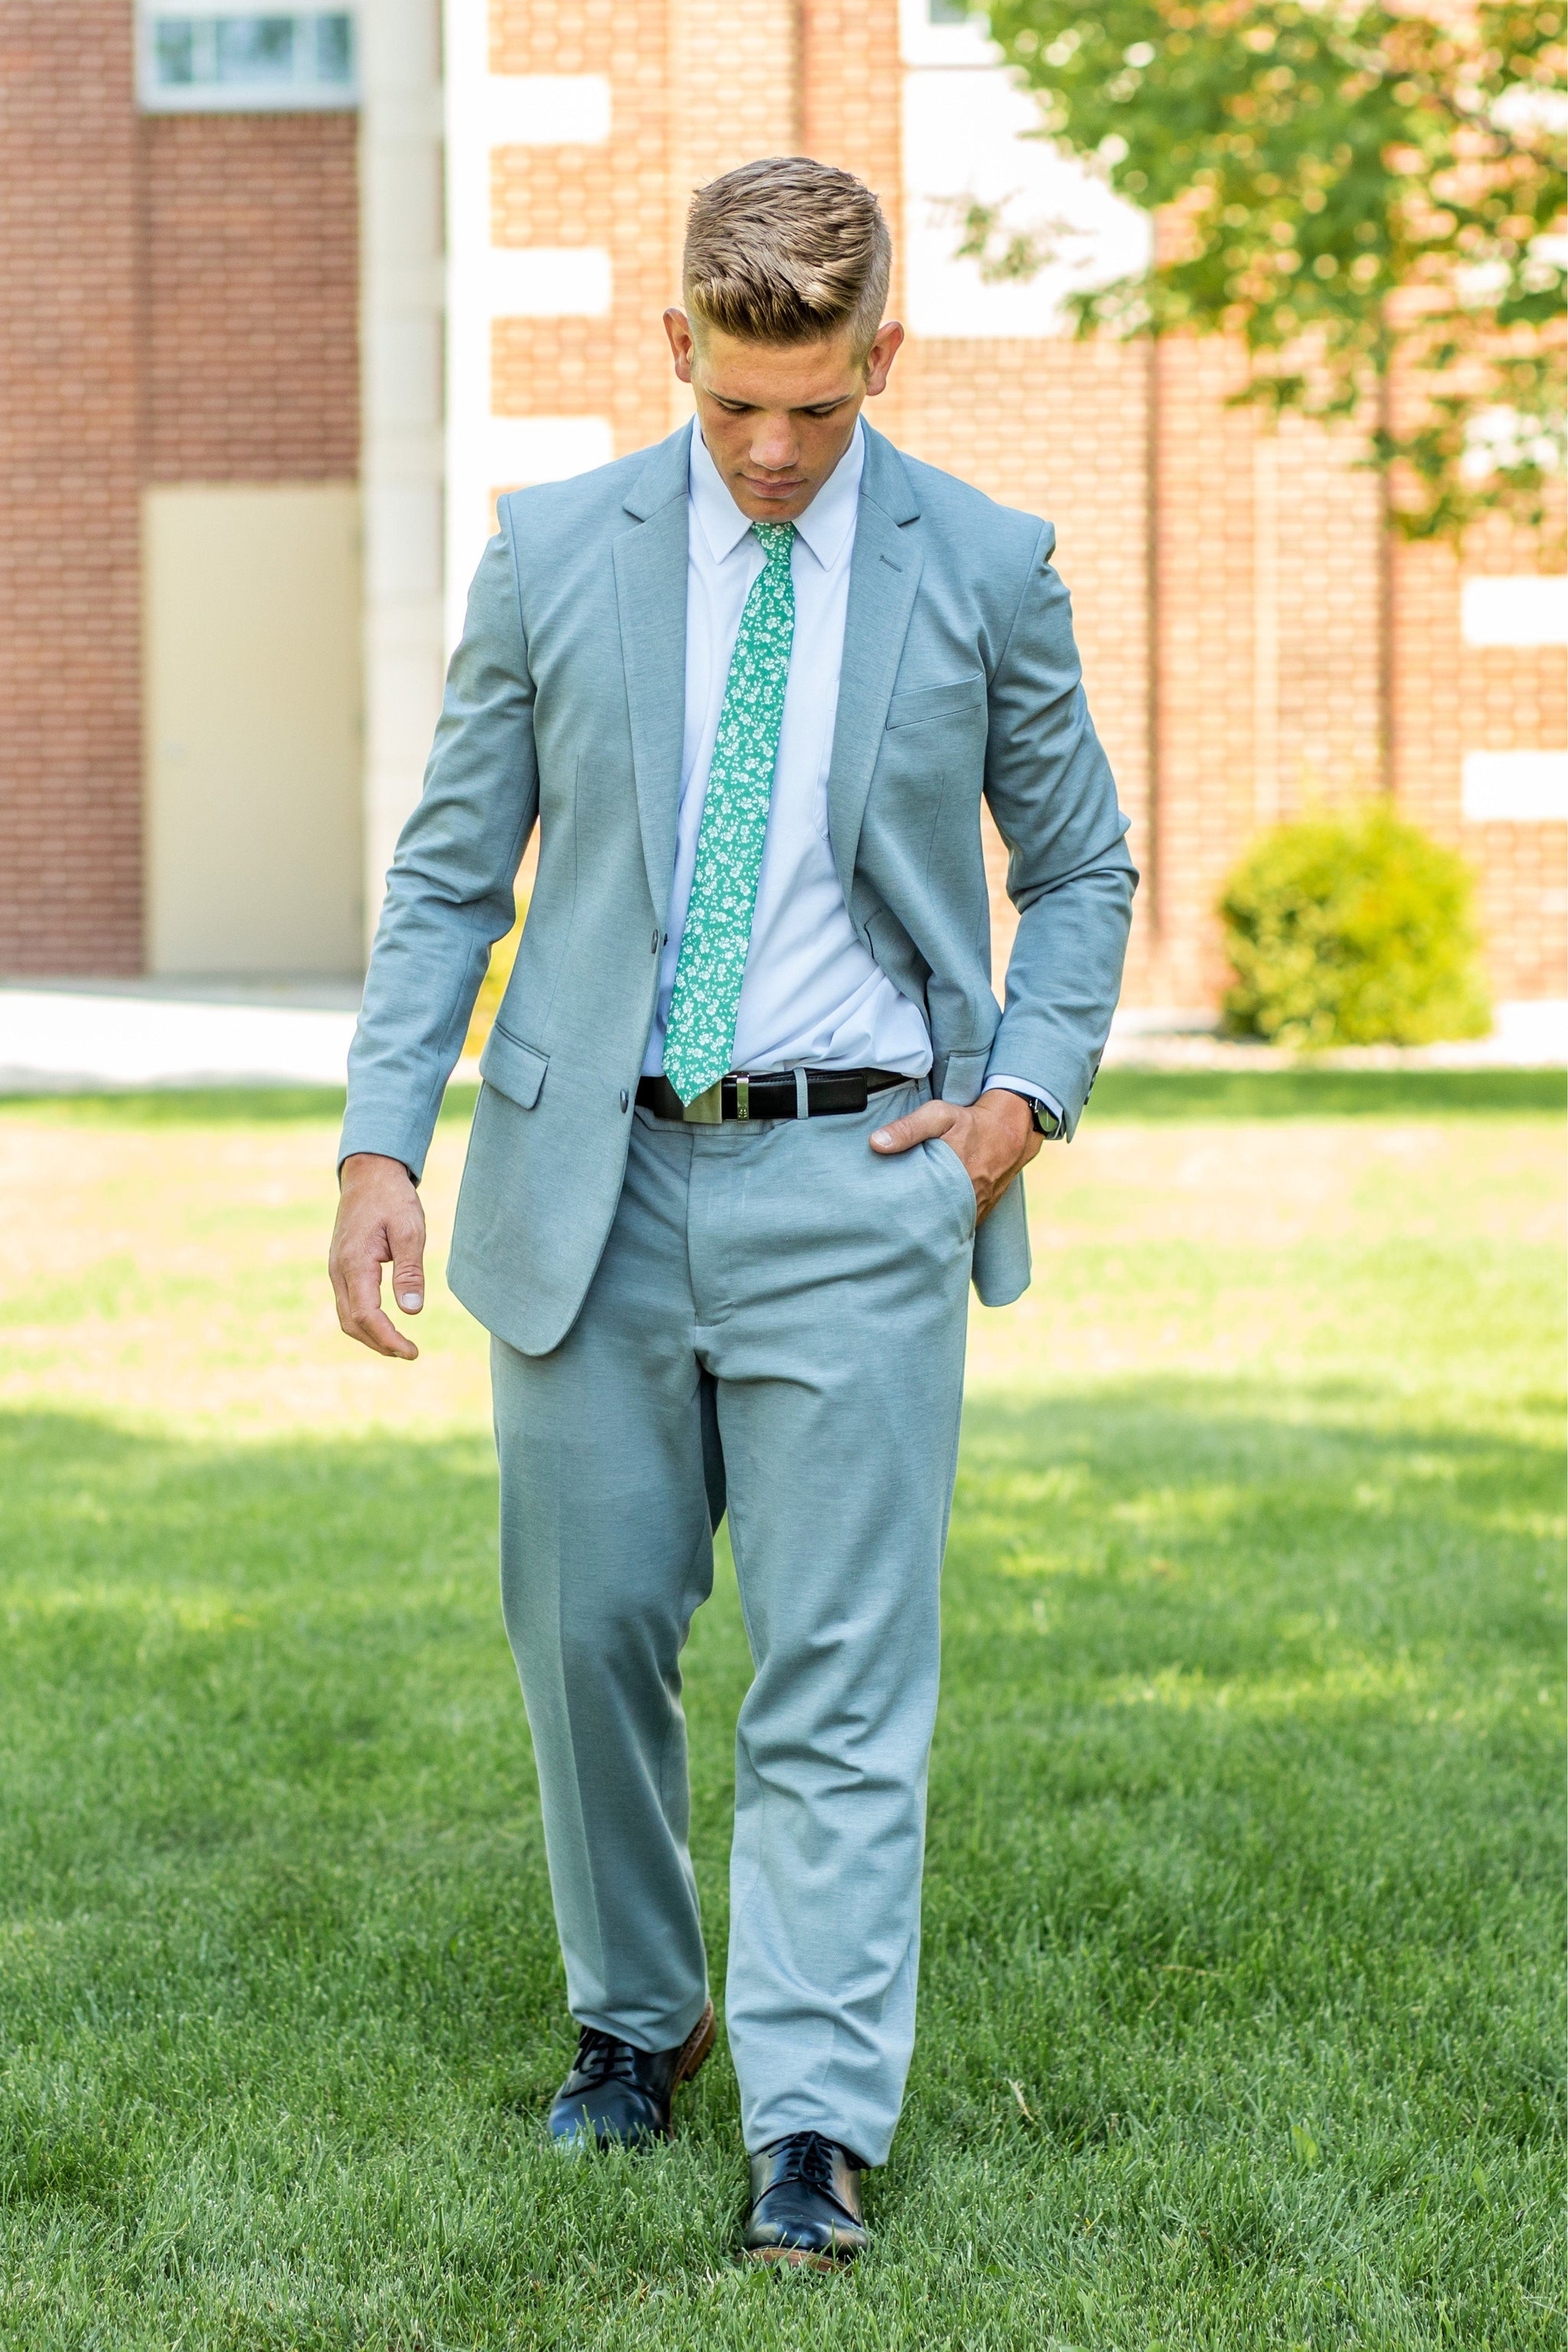 How to Know if your Groom Suit Fits Properly ⋆ Ruffled